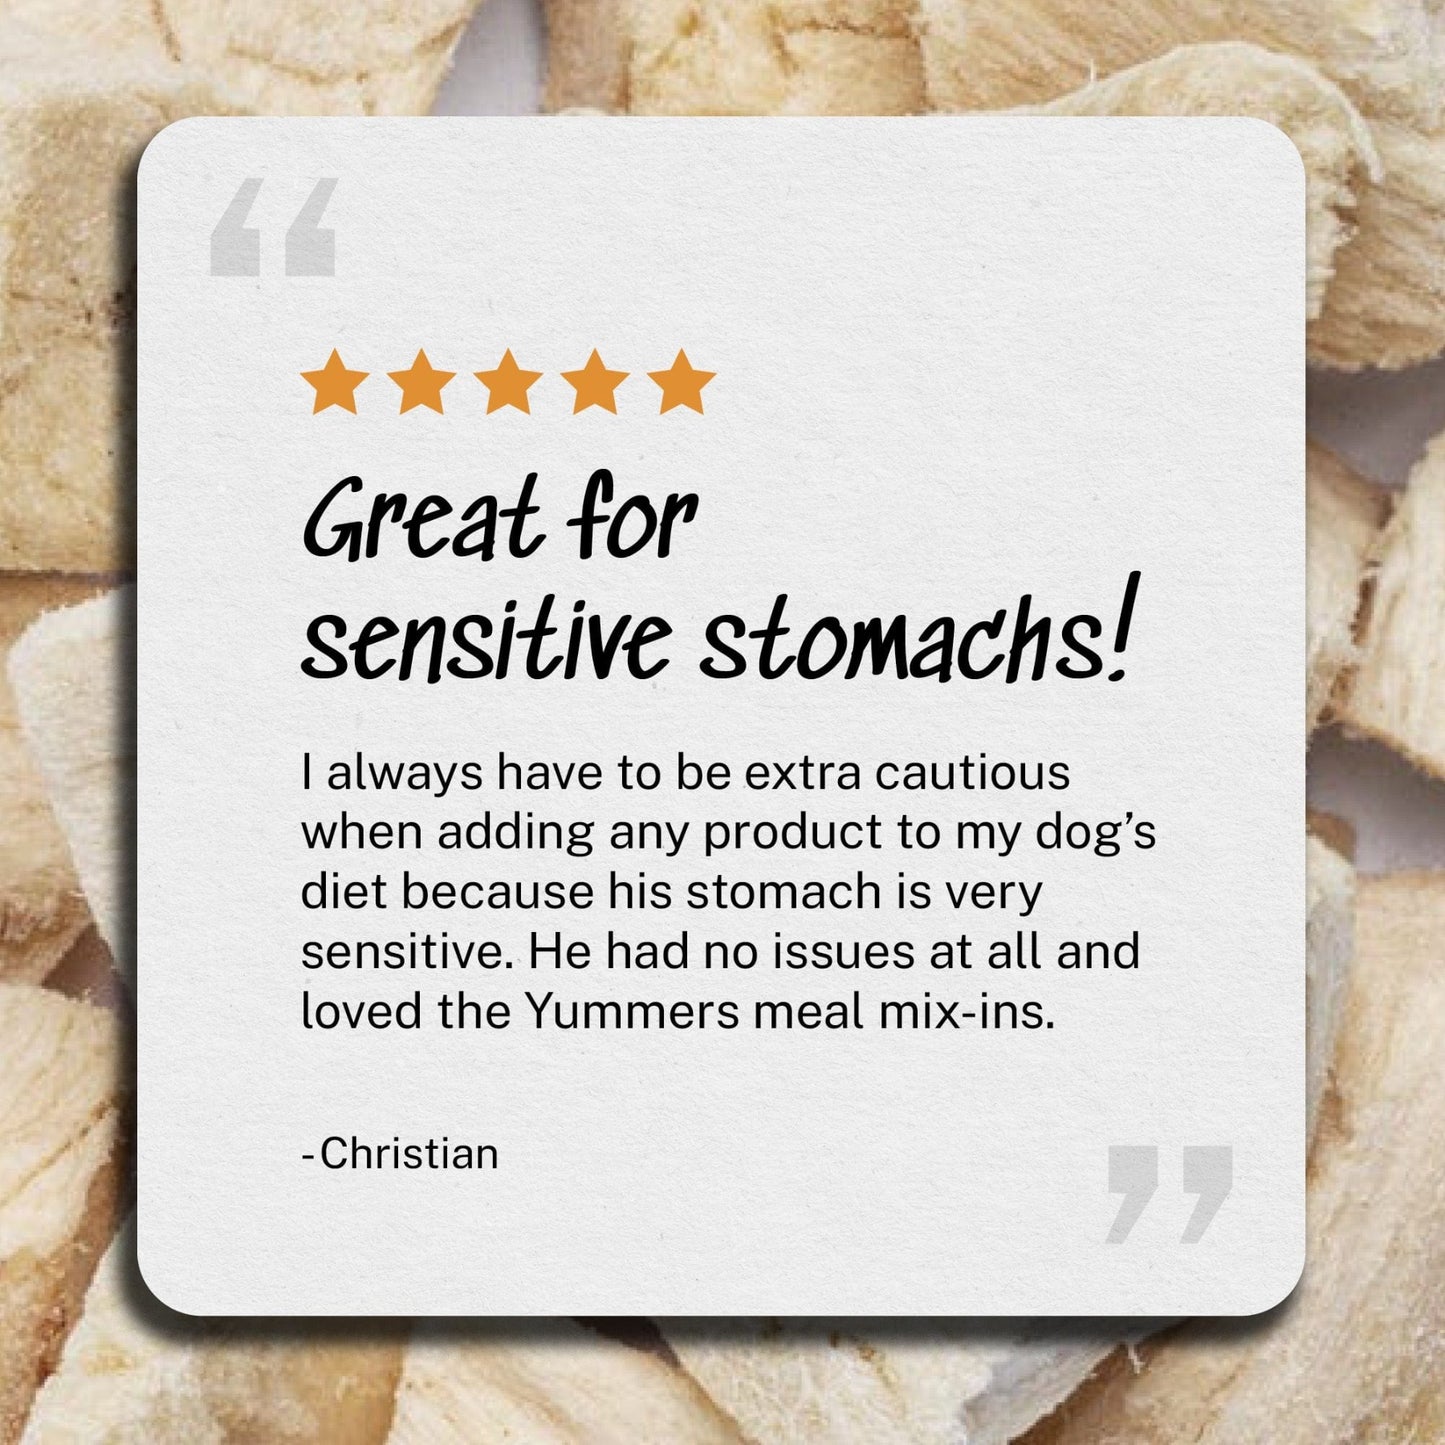 Review: Great for sensitive stomach - I always have to be extra cautious when adding any product to my dog’s diet because his stomach is very sensitive. He had no issues at all and loved the Yummers meal mix-ins. - Christian